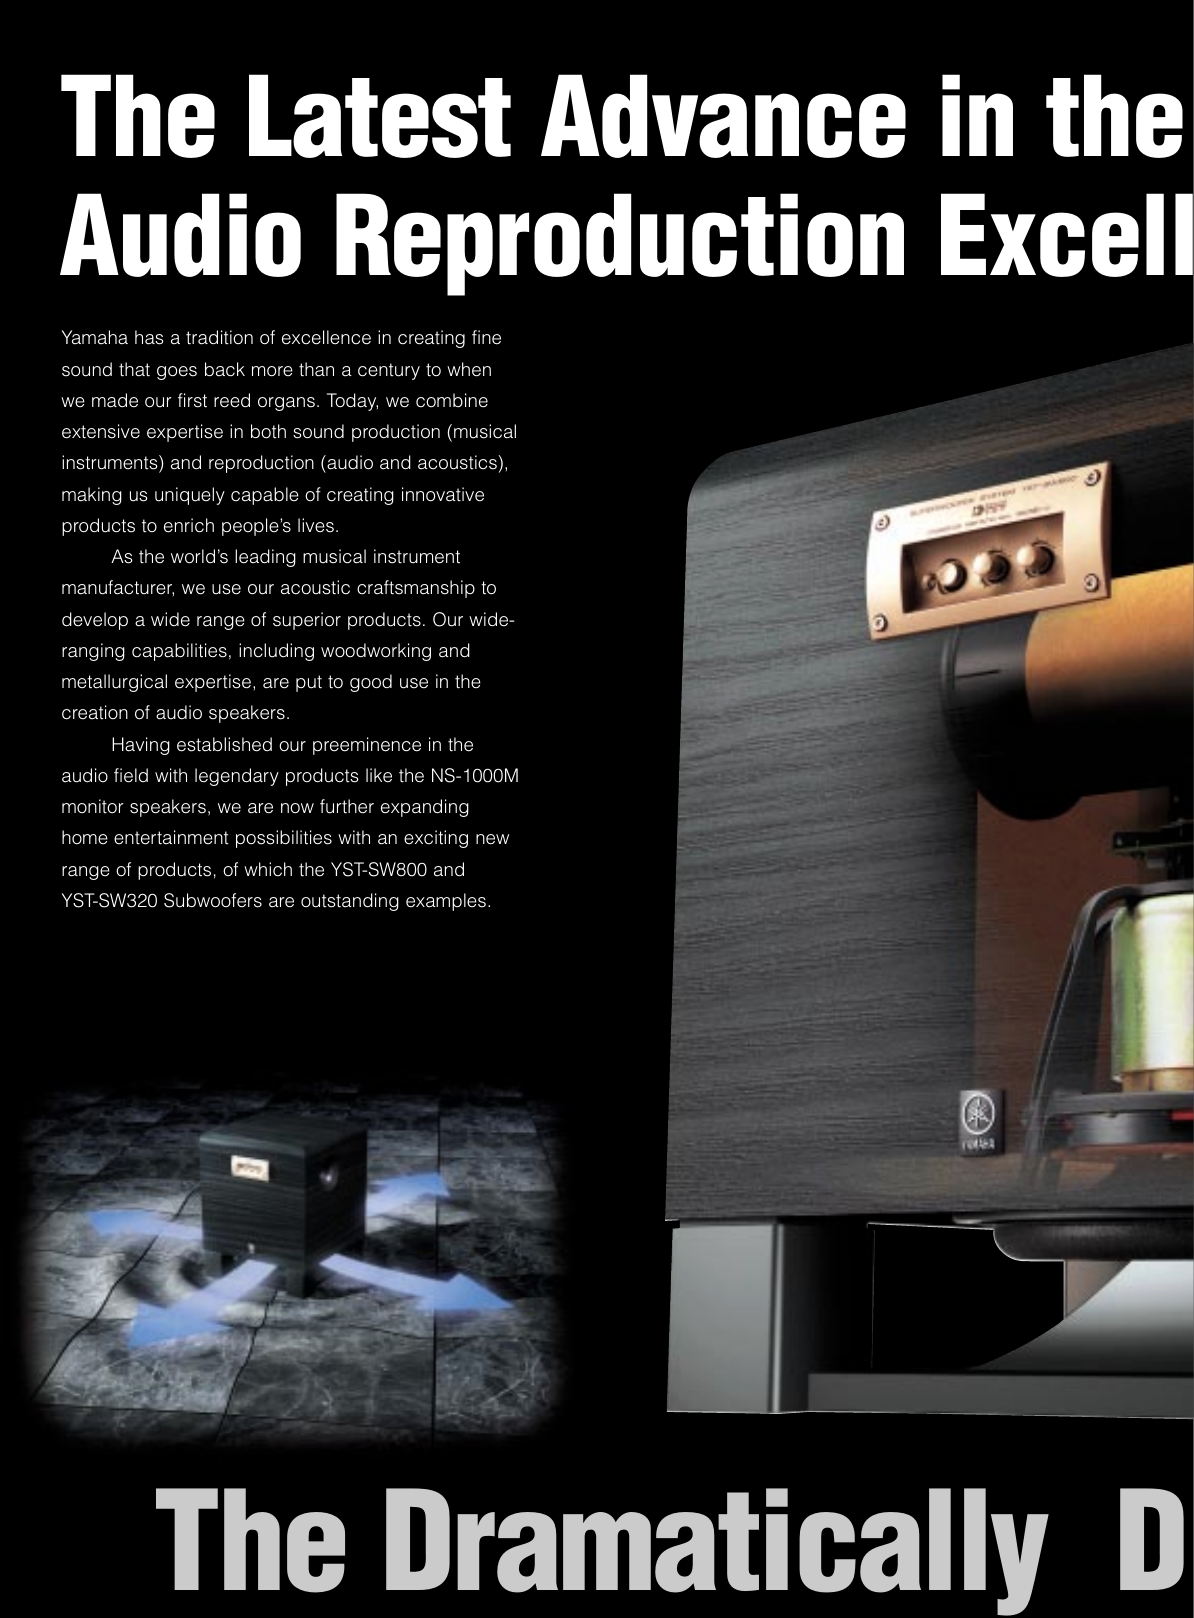 Page 2 of 8 - Yamaha Speaker-System-Advanced-Yst-And-Qd-Bass-Subwoofers-Users-Manual YST-SW800/320 Cat.(U/C)  Yamaha-speaker-system-advanced-yst-and-qd-bass-subwoofers-users-manual